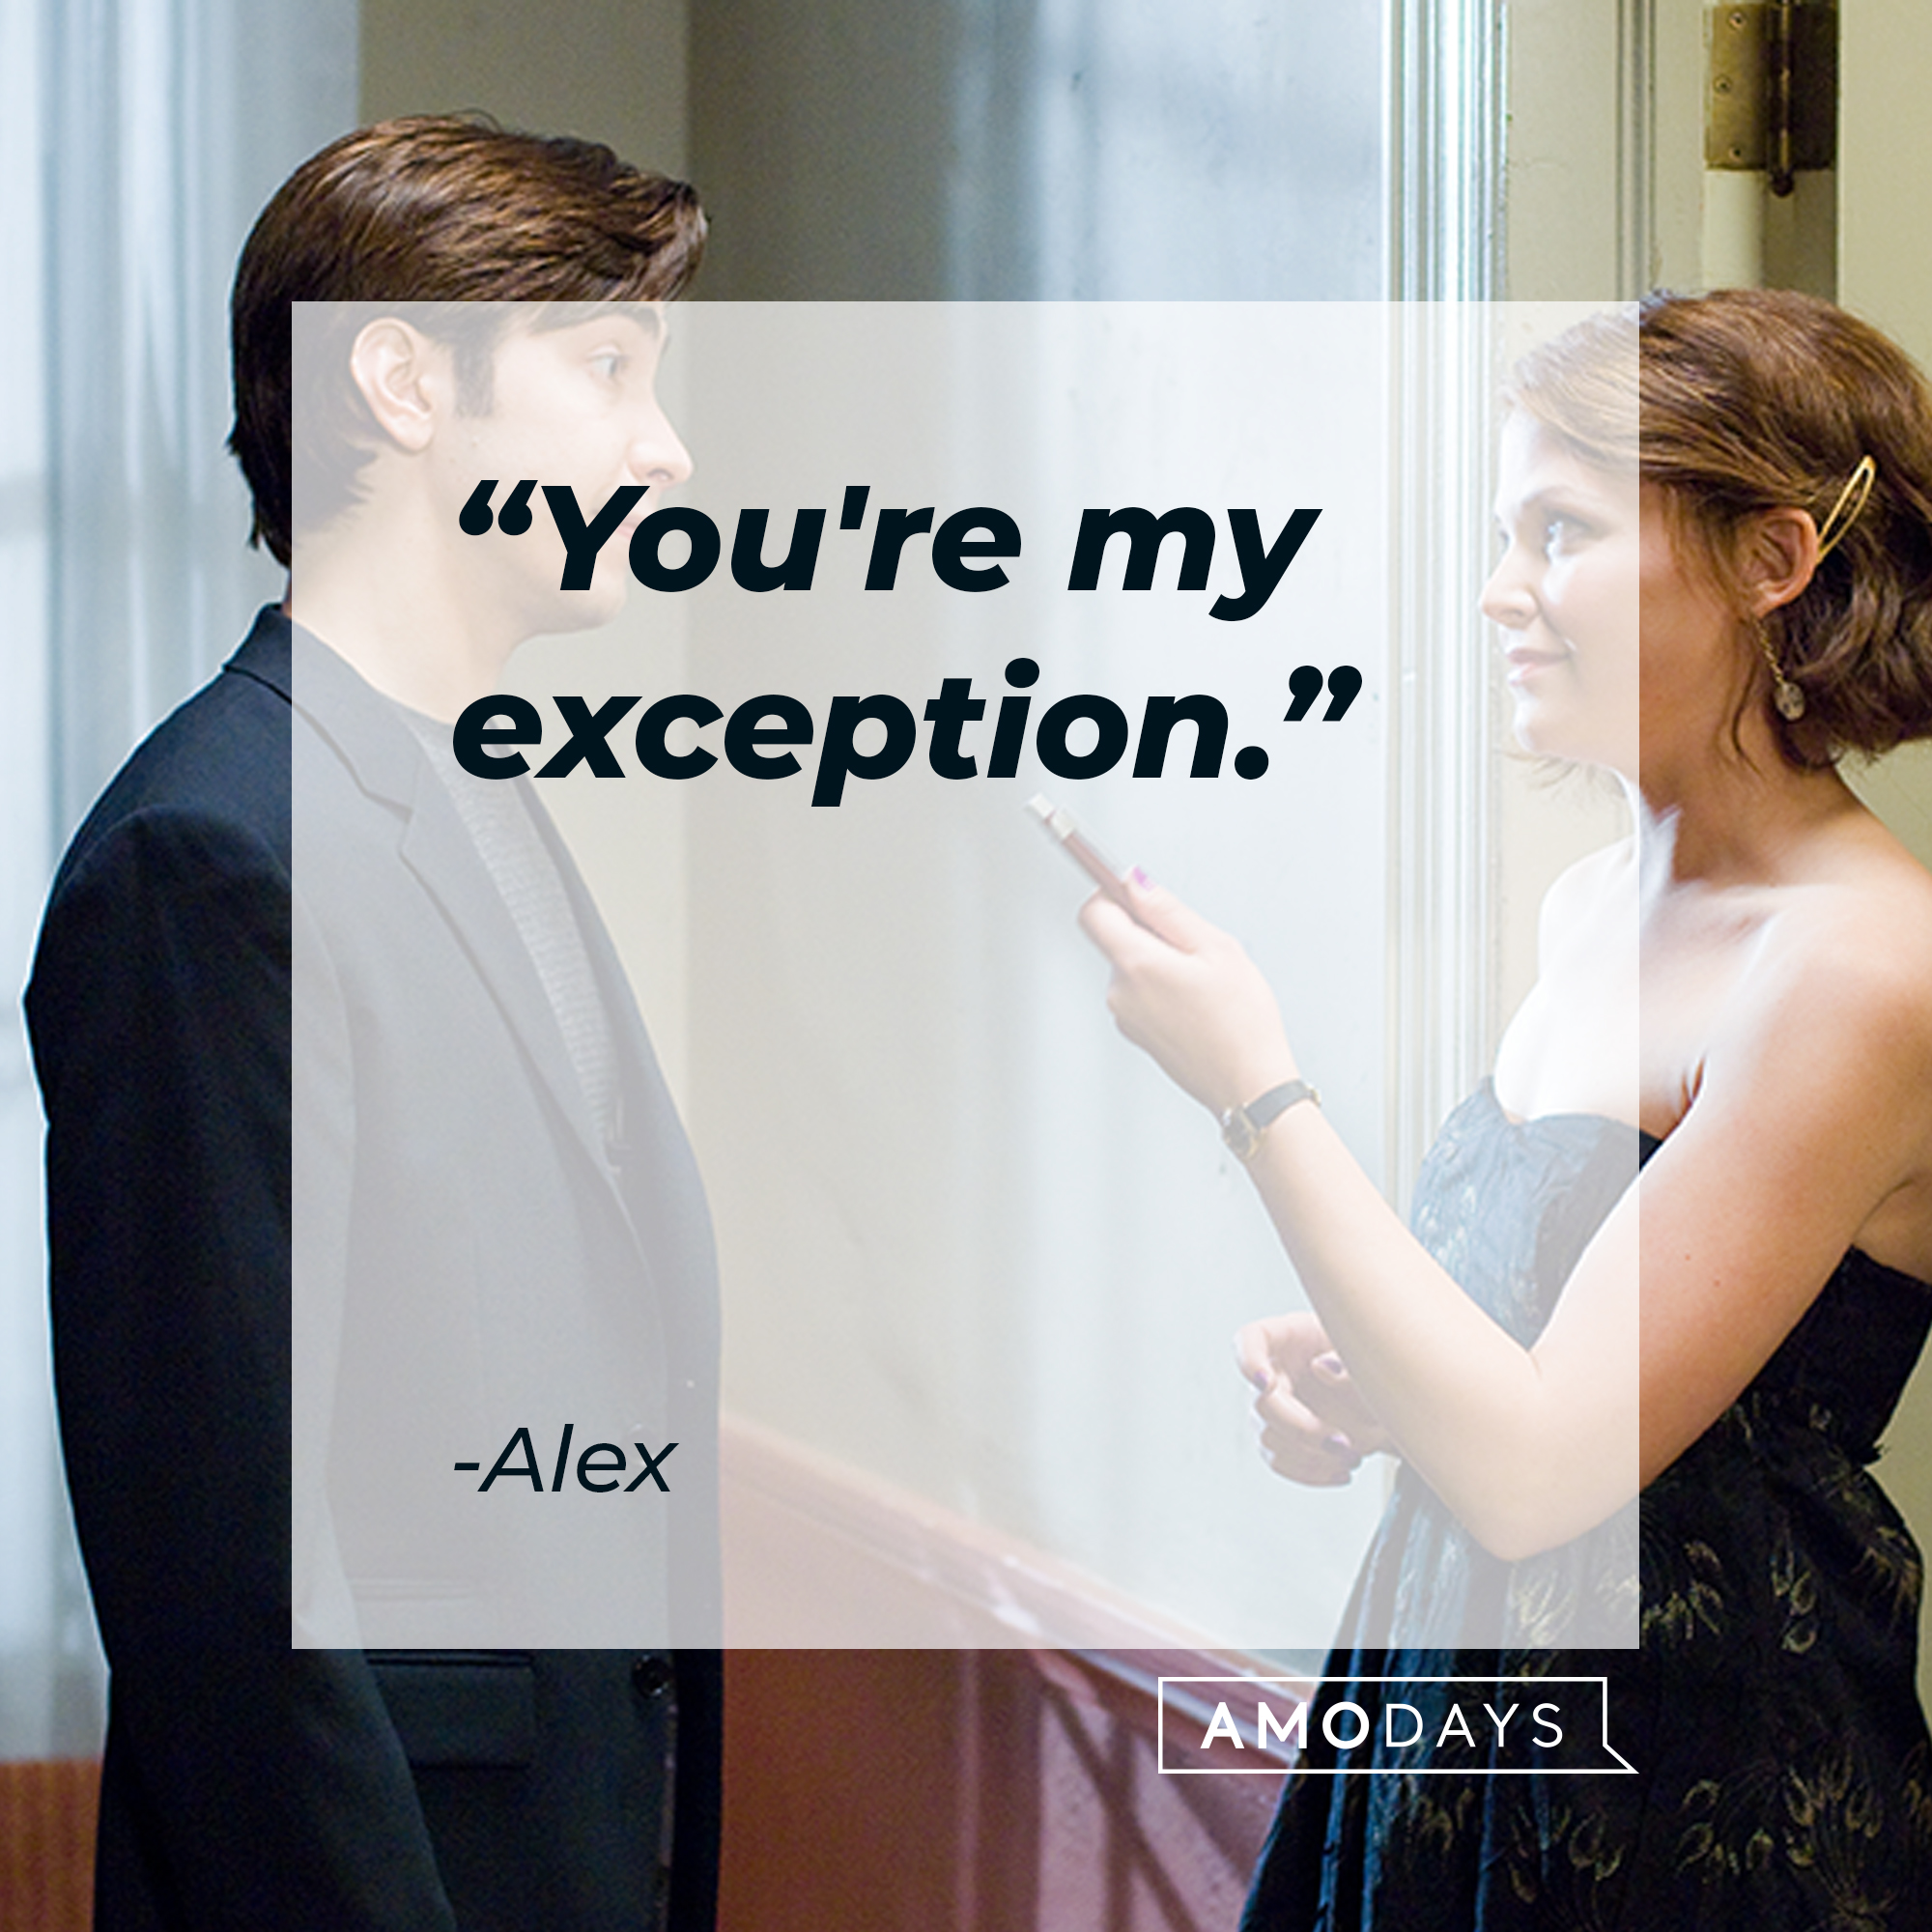 Alex's quote: "You're my exception." | Source: Source: Facebook/hesjustnotthatintoyou